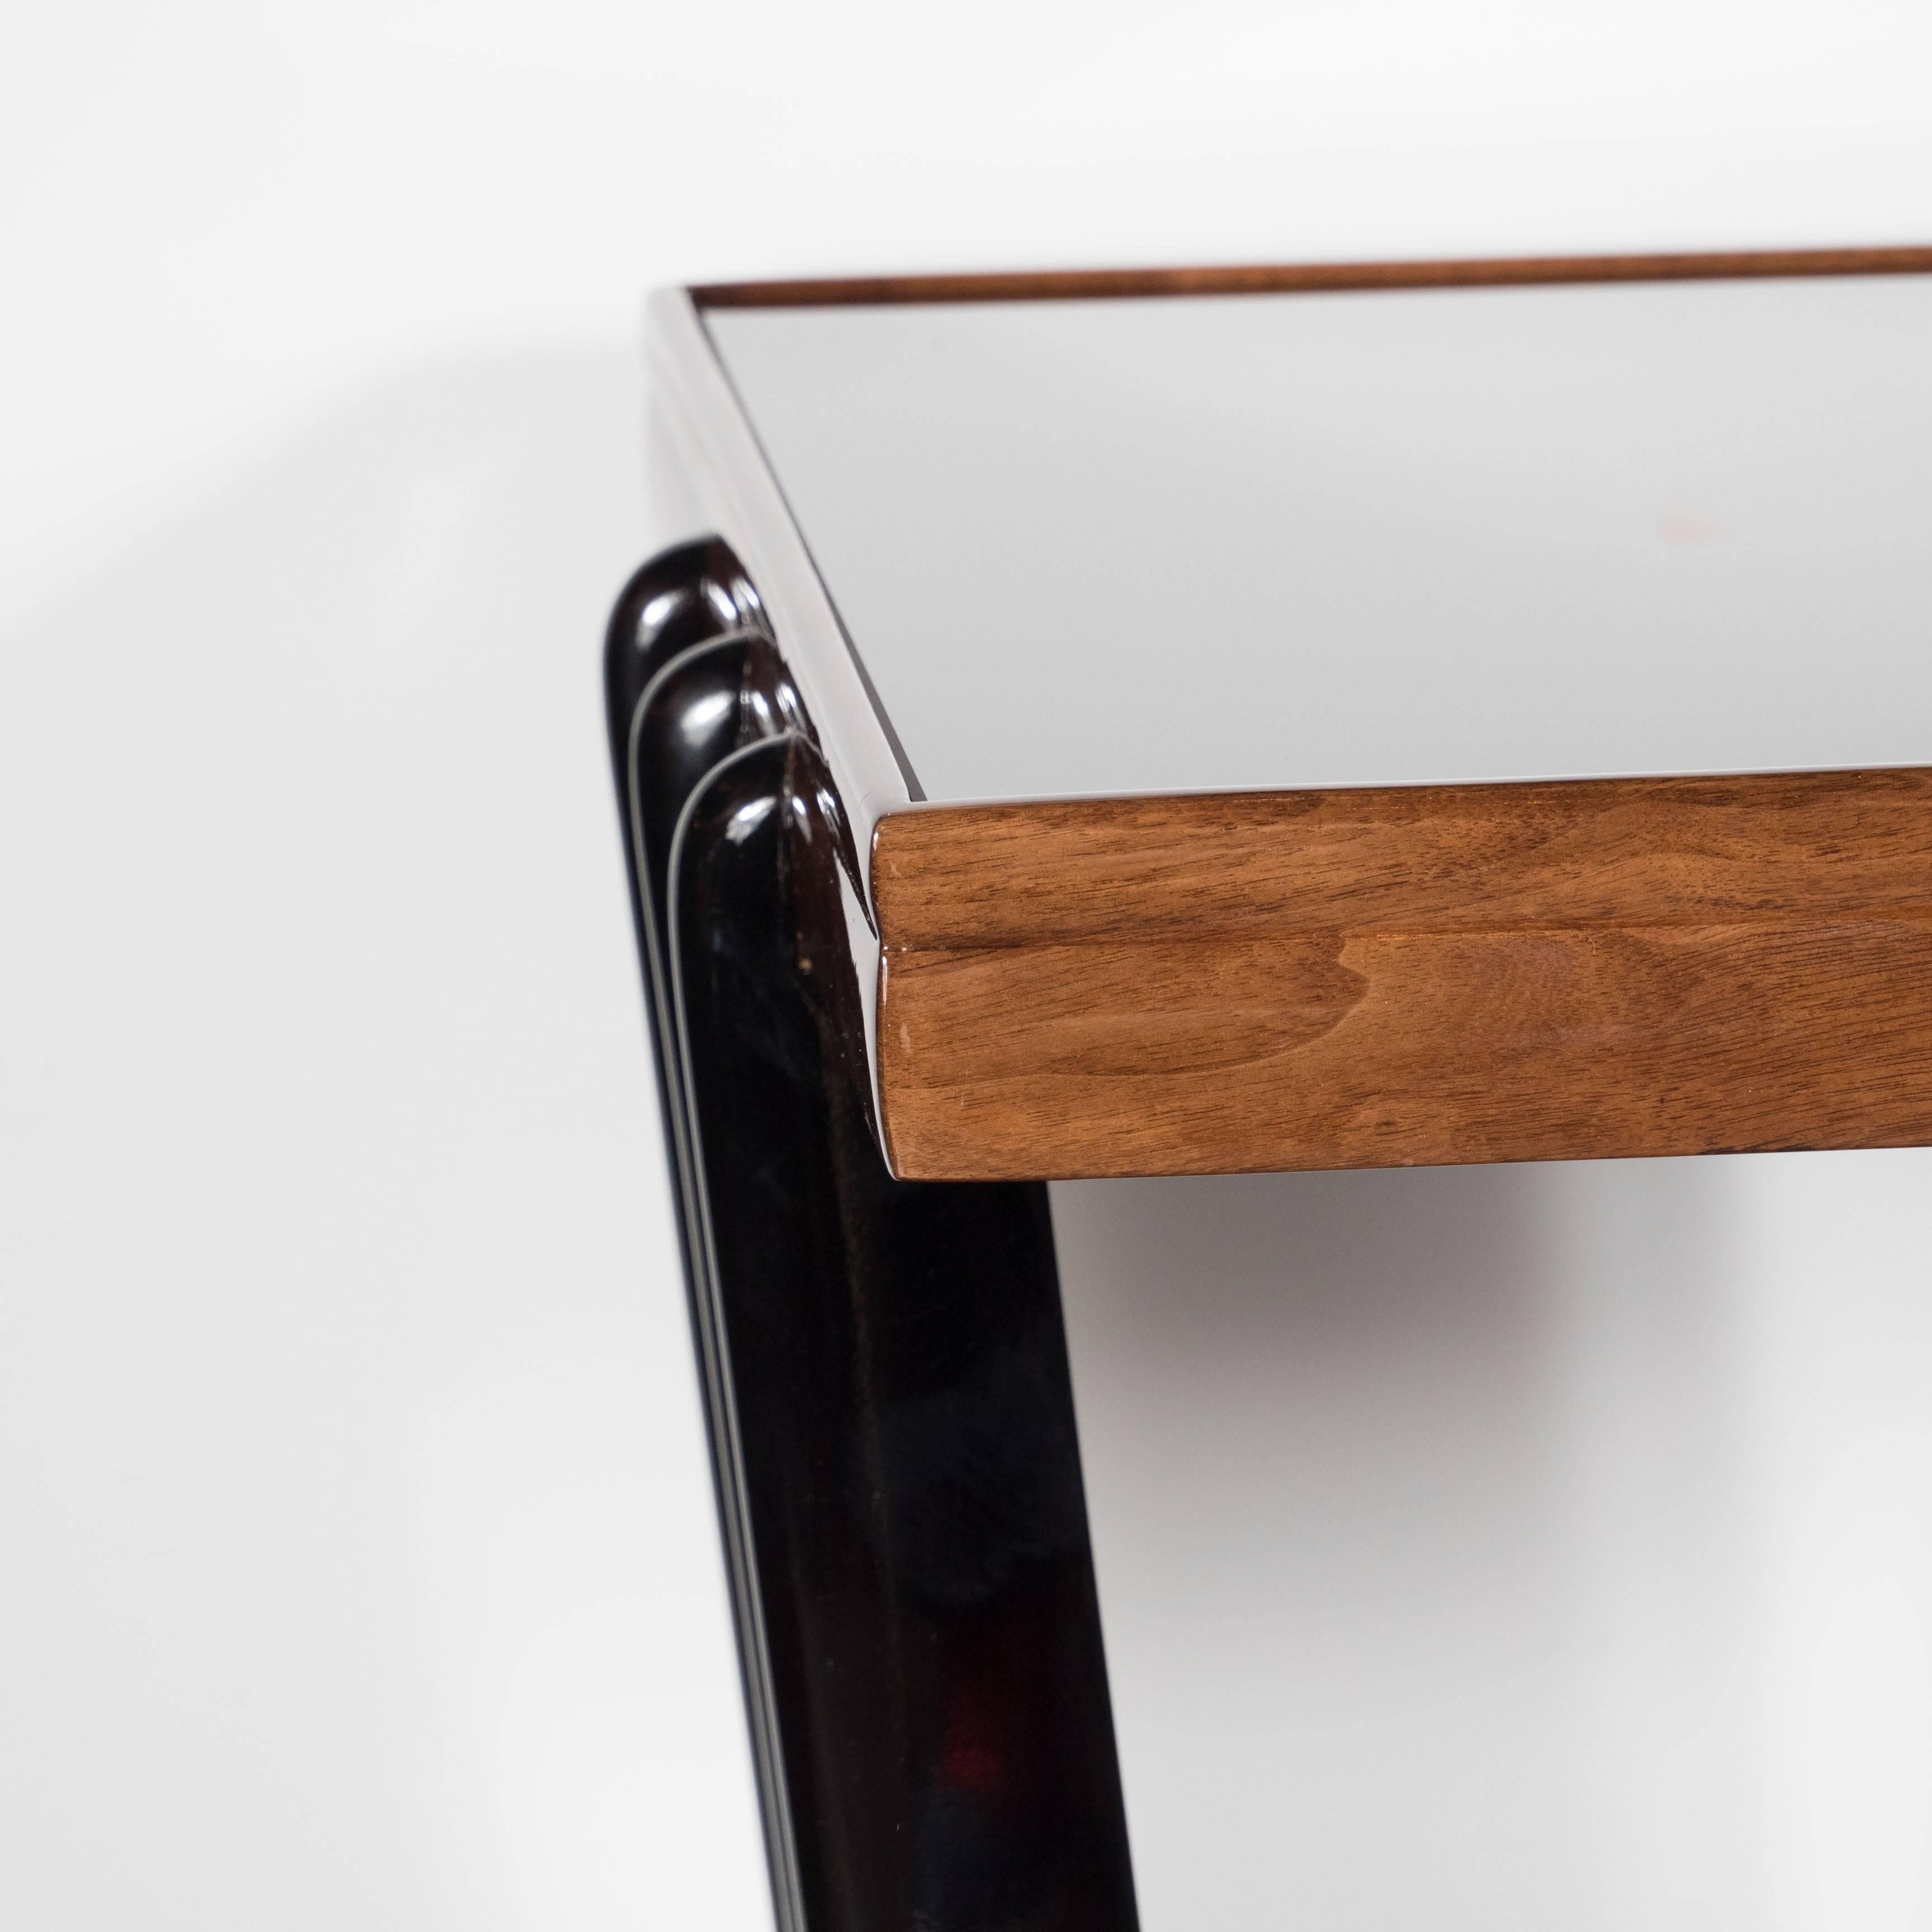 A stunning Art Deco Skyscraper end table in bookmatched walnut, black lacquer and vitrolite, American circa 1935, the stylish vitrolite tabletop framed with beautiful grained bookmatched walnut, the table top surround in Modernist streamlined